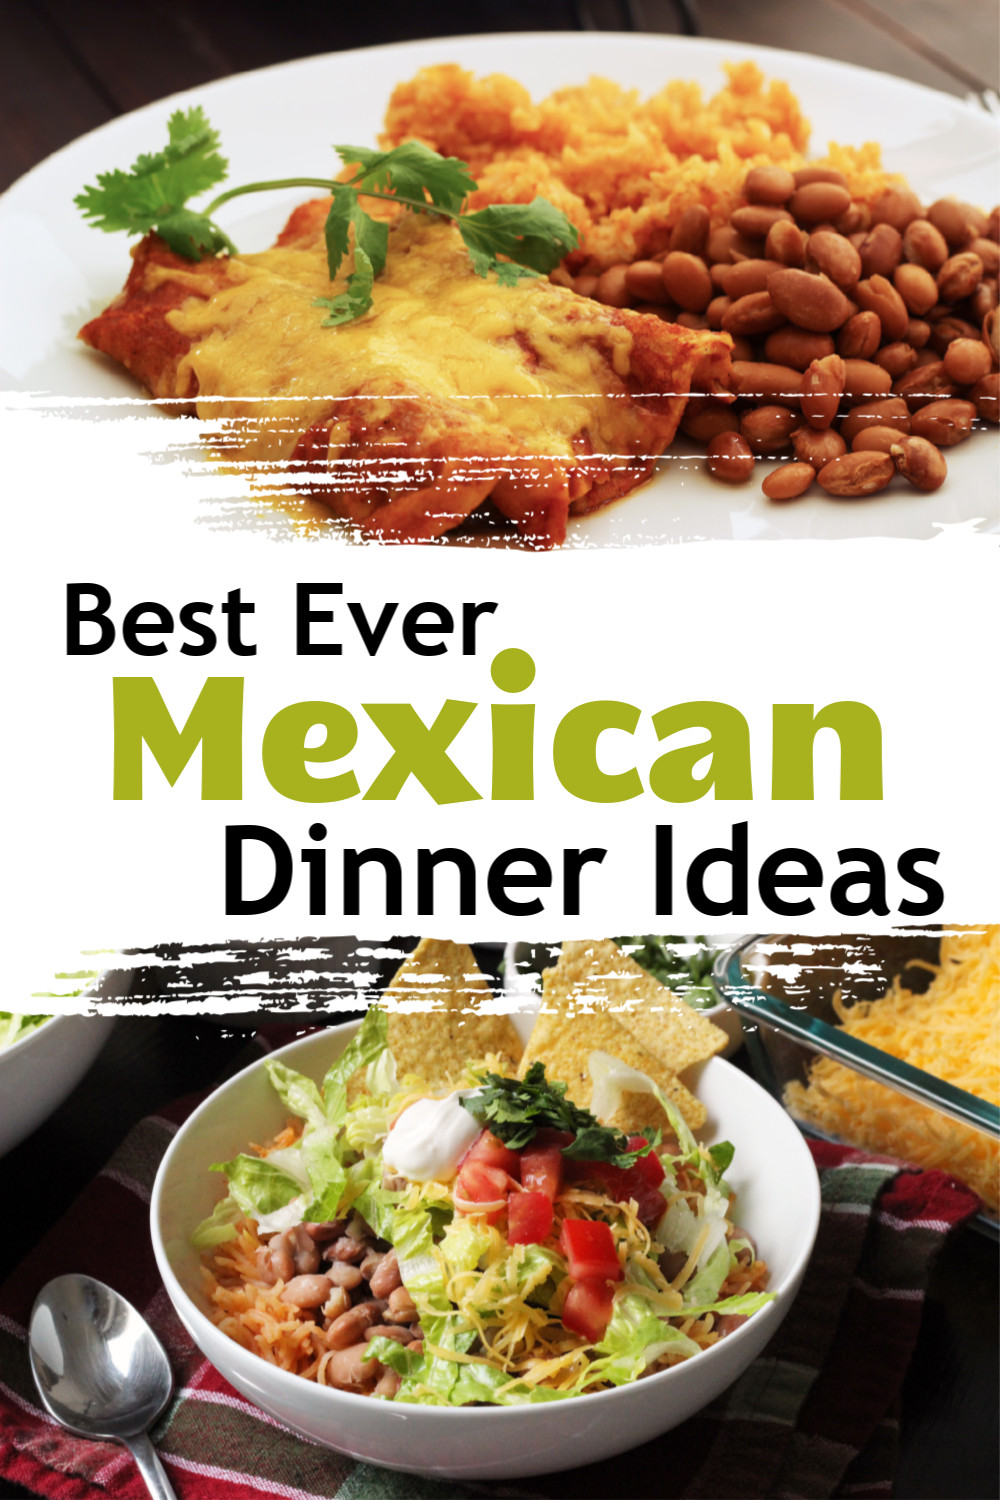 Mexican Food Ideas For Dinner
 Bud Friendly Mexican Food Recipes